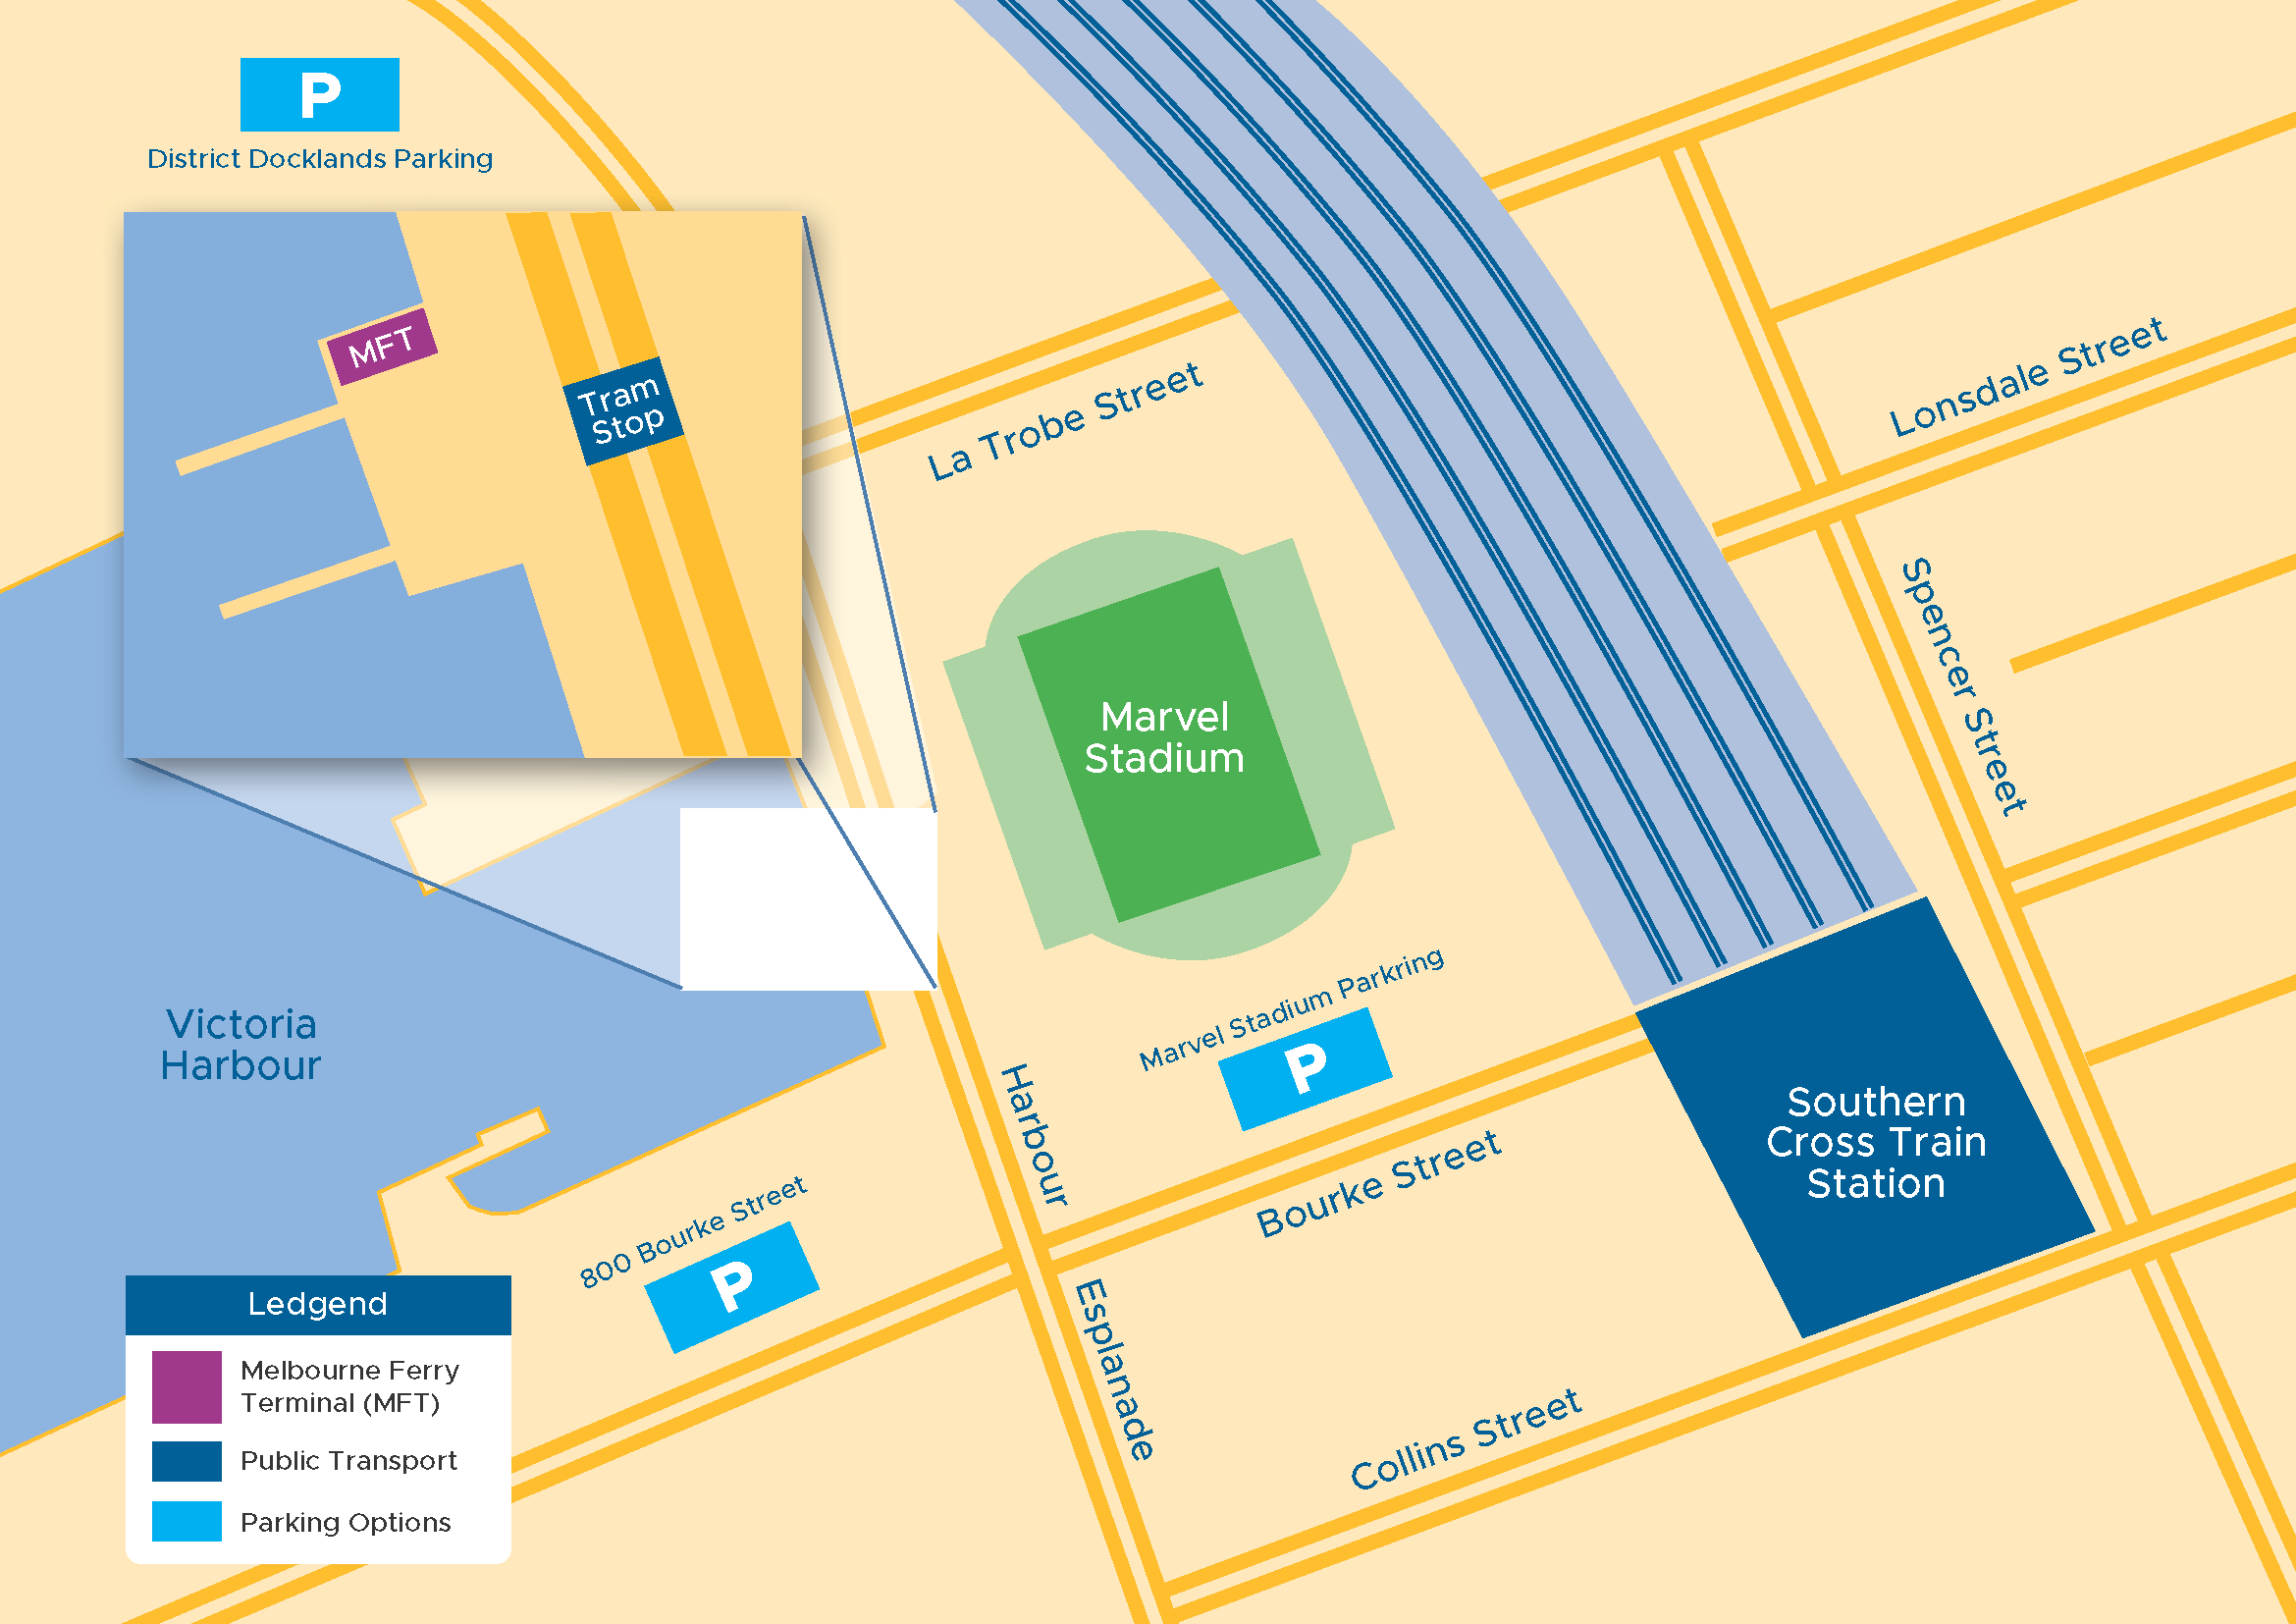 Melbourne Ferry Terminal Location Map